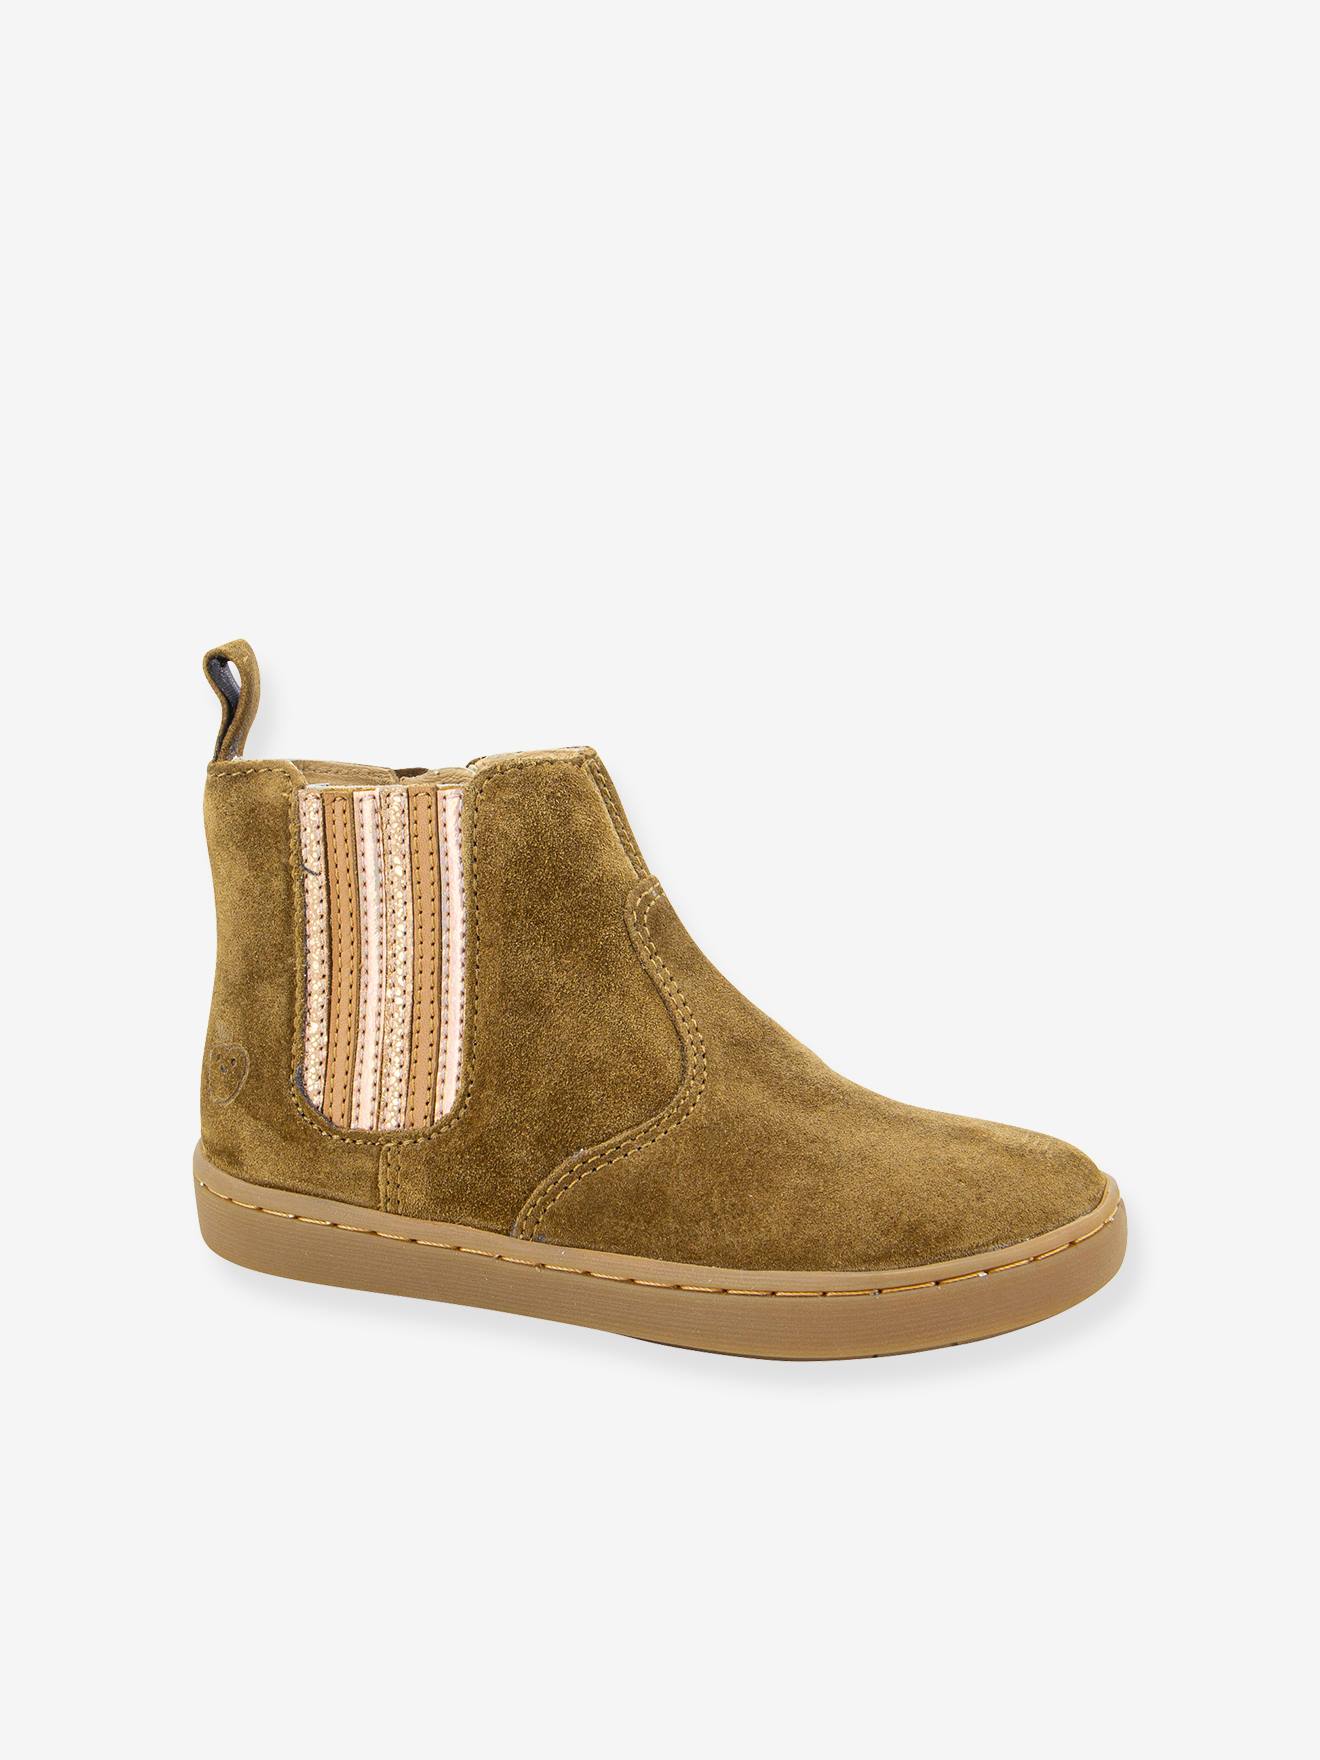 Boots for Babies, Play New ShineVelours by SHOO POM(r) camel